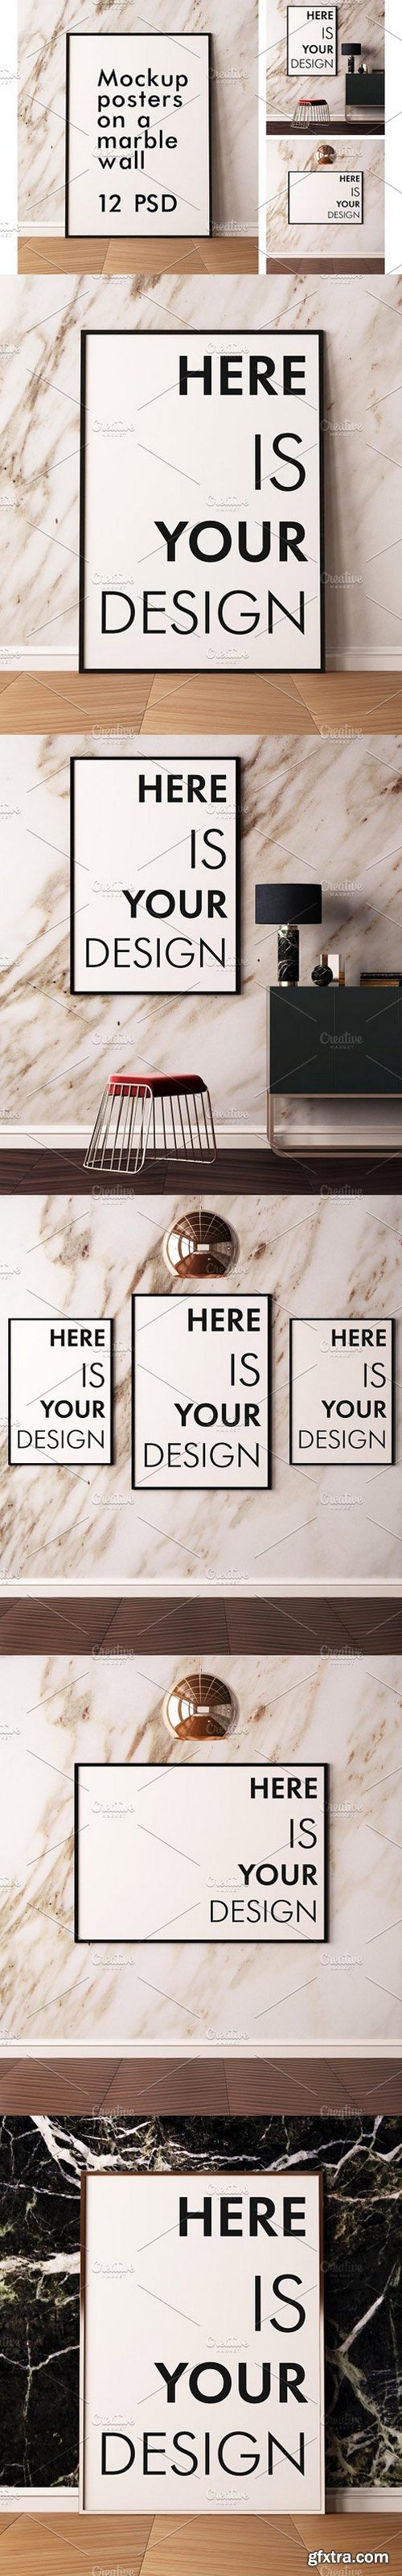 CM - Mockup posters on a marble wall 1518244